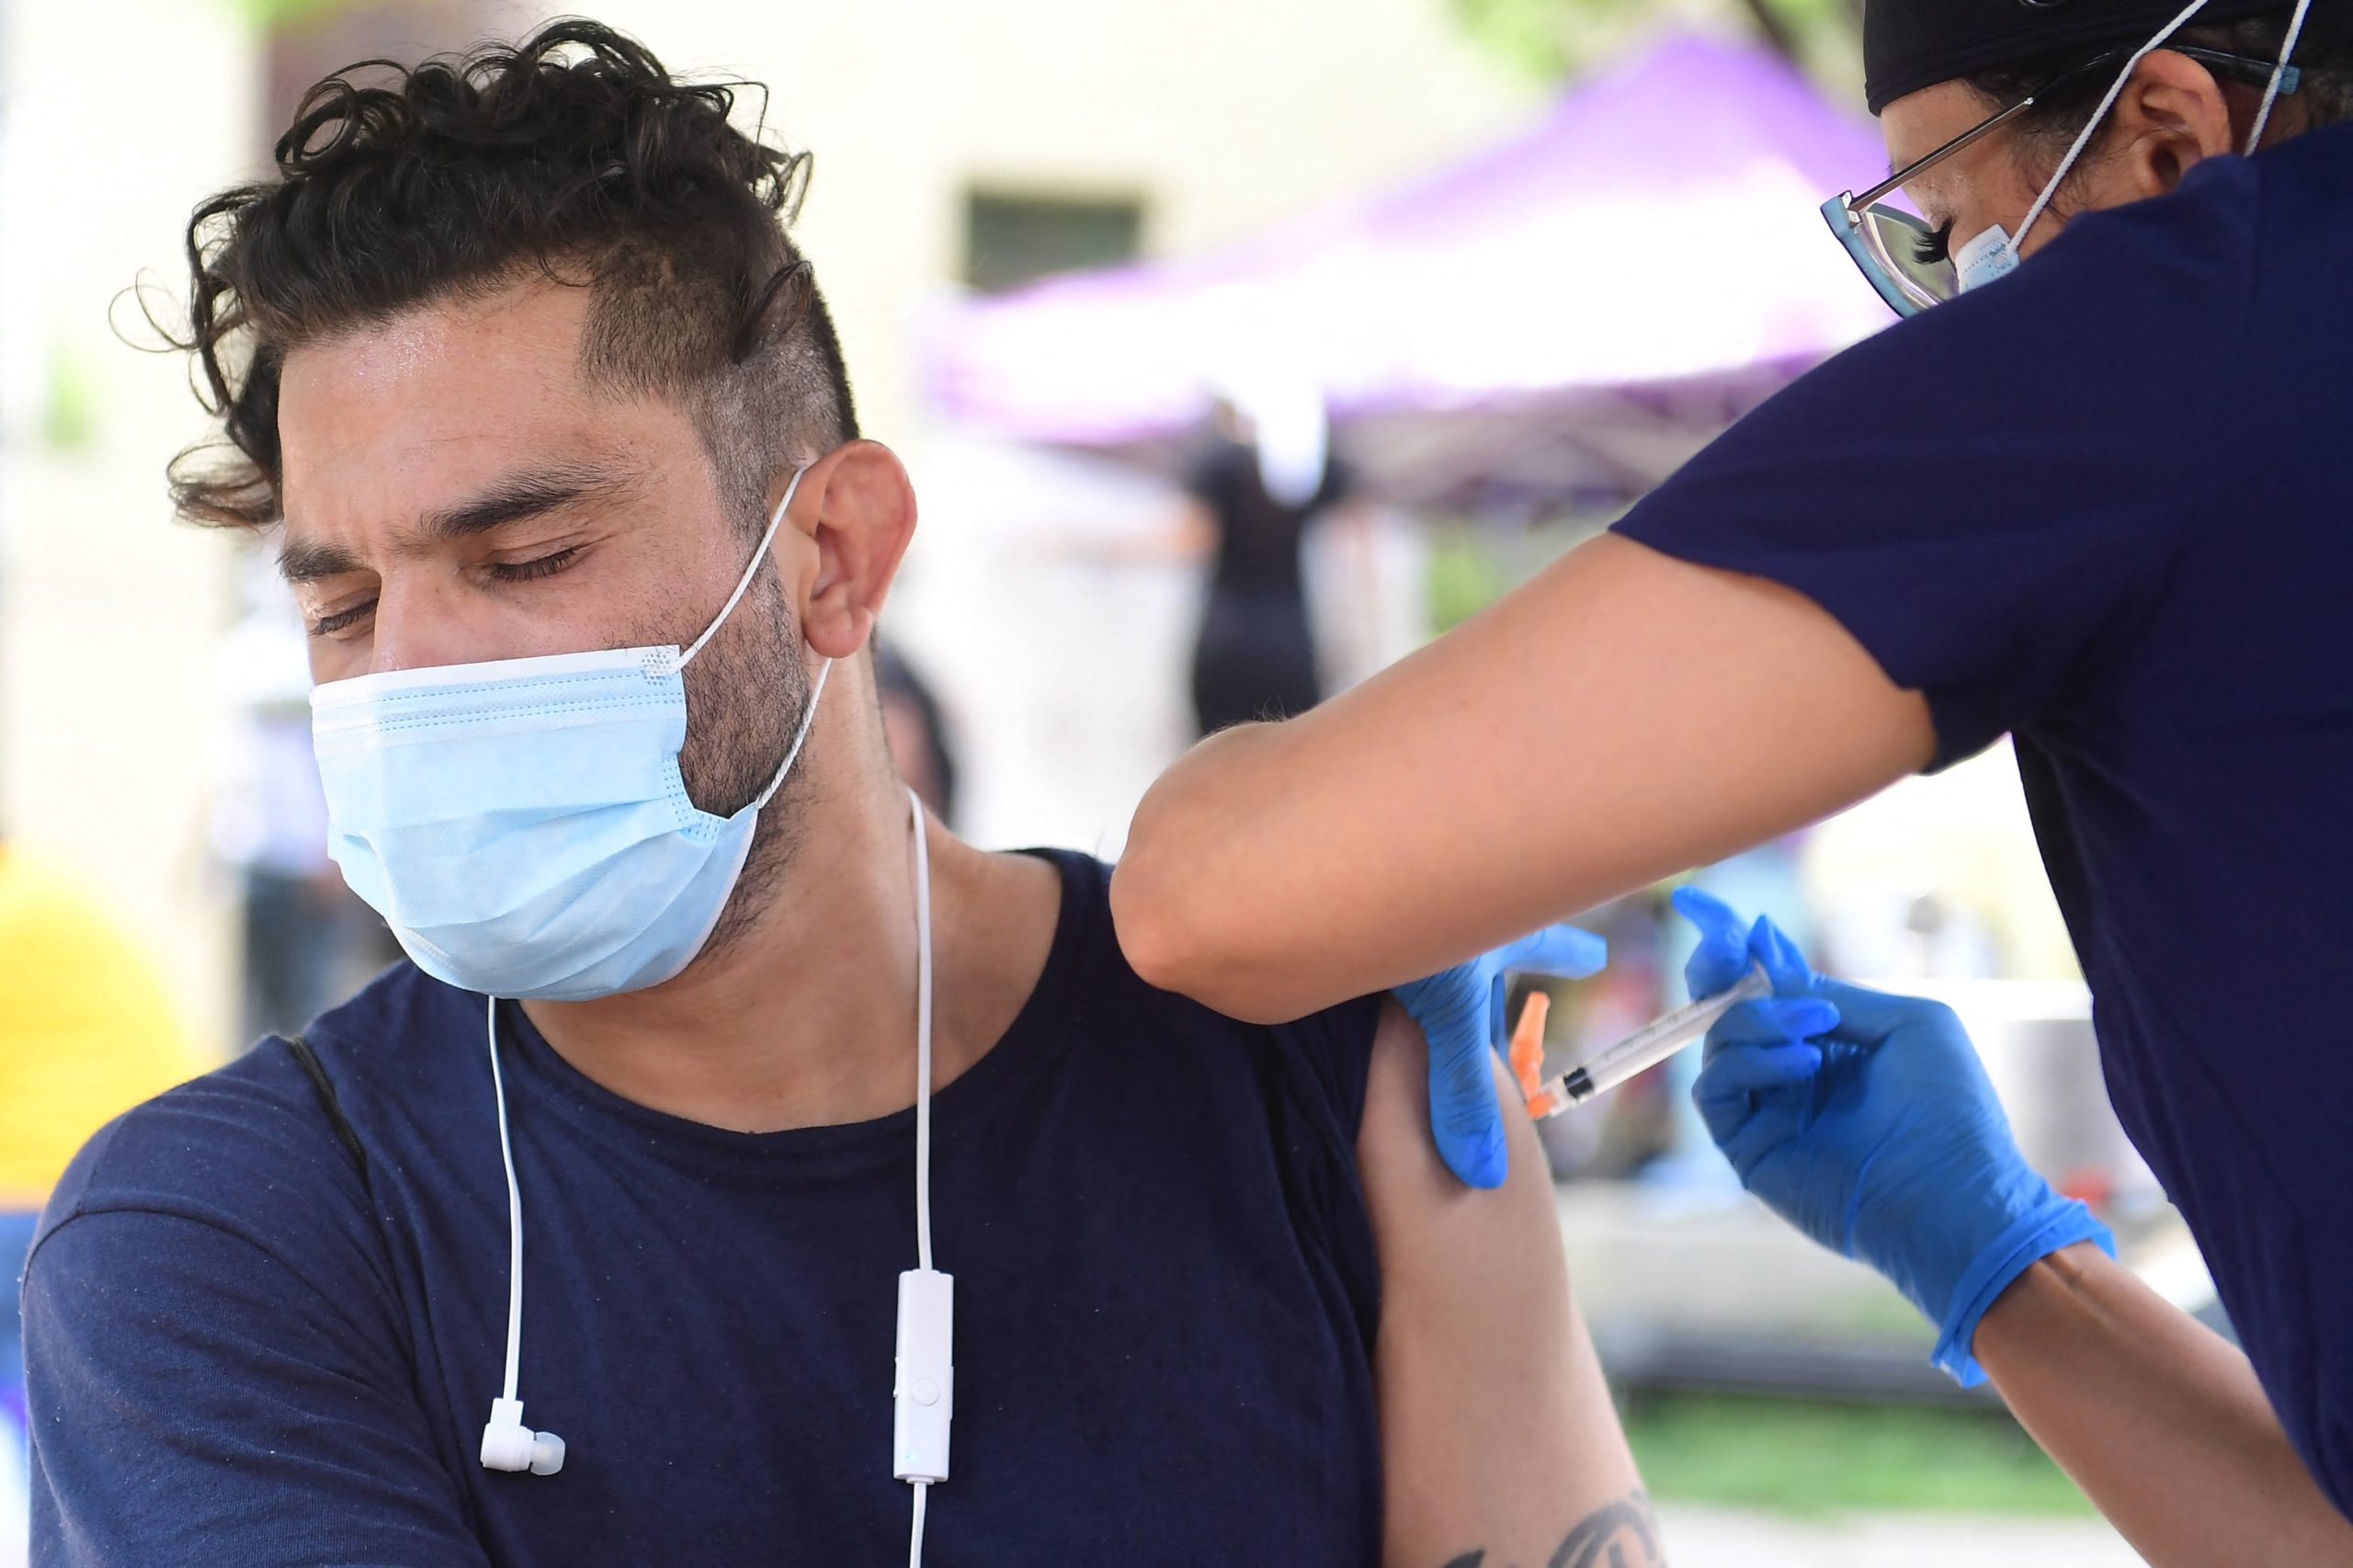 Juan Rodriguez (L) reacts while receiving Johnson & Johnson's Janssen Covid-19 vaccine administered by vocational nurse Christina Garibay at a Skid Row community outreach event where Covid-19 vaccines and testing were offered in Los Angeles, California on August 22, 2021. (Photo by Frederic J. BROWN / AFP) (Photo by FREDERIC J. BROWN/AFP via Getty Images)